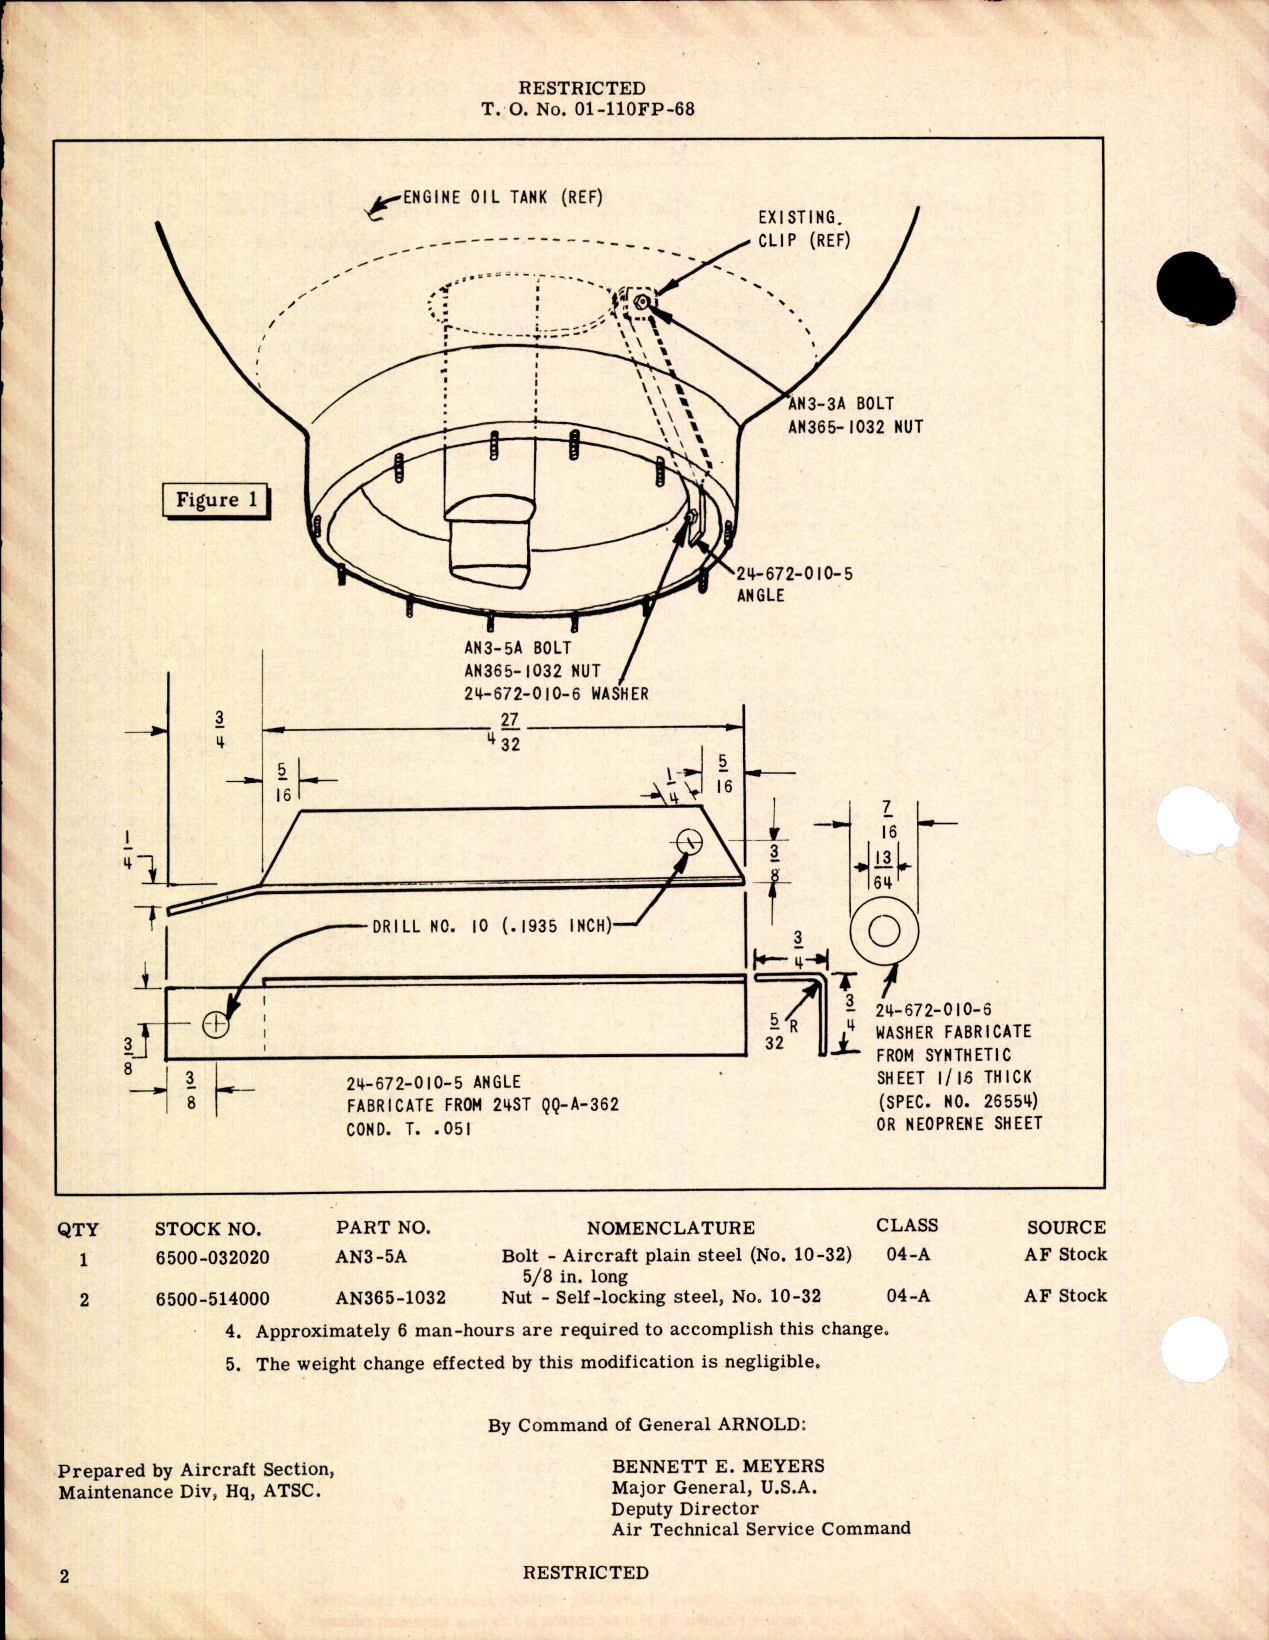 Sample page 2 from AirCorps Library document: Modification of Main Engine Oil Tank for P-63A 